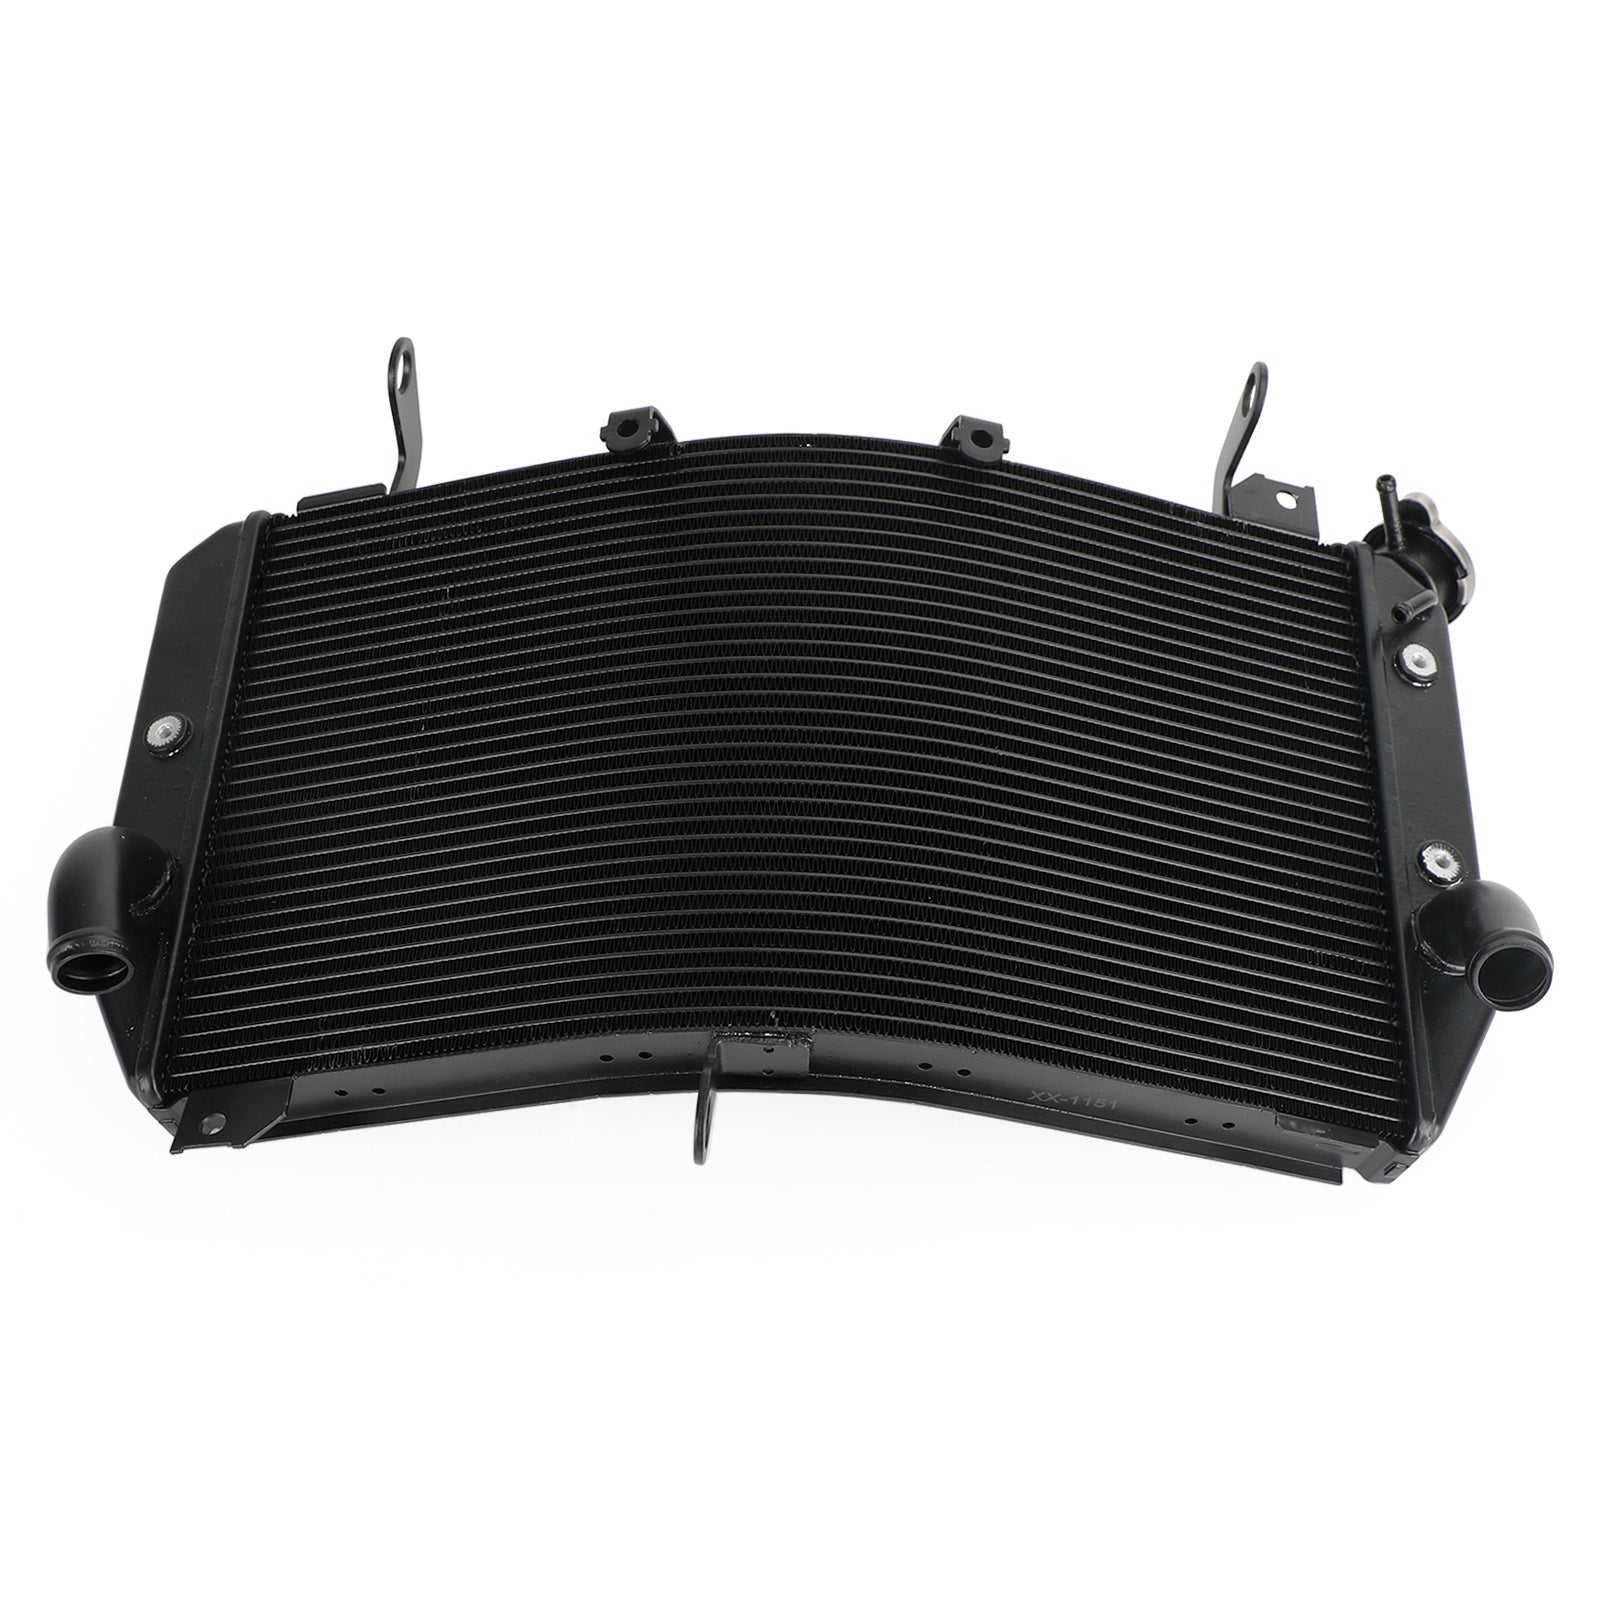 Radiator Cooling Cooler For Yamaha FZ10 MT-10 MTN1000 2016-2021 YZF-R1 15-22 Generic